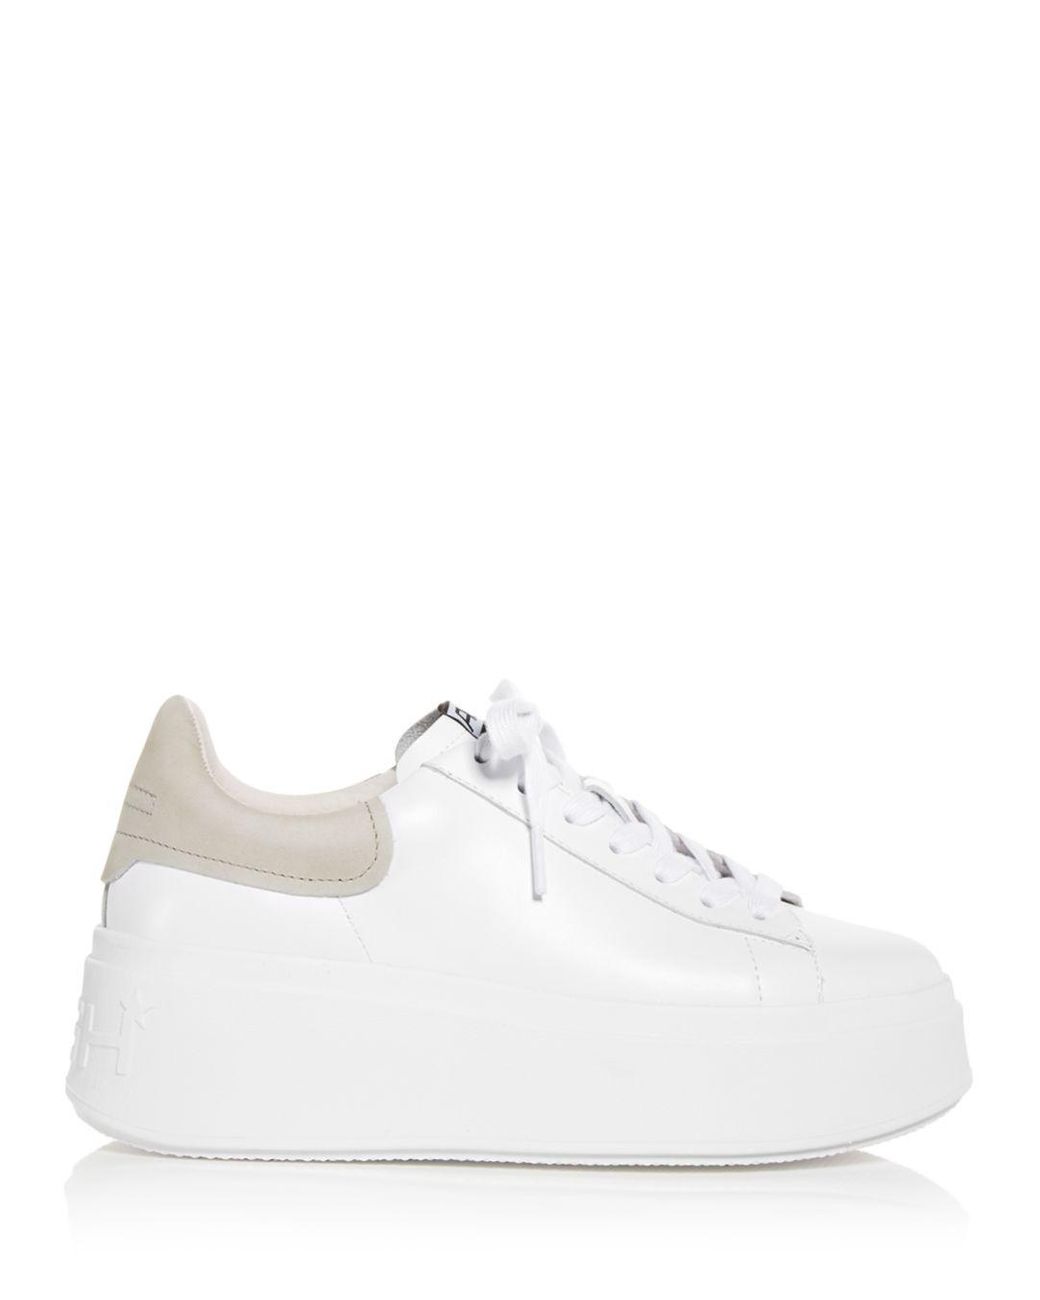 Ash Moby Low Top Platform Sneakers in White | Lyst